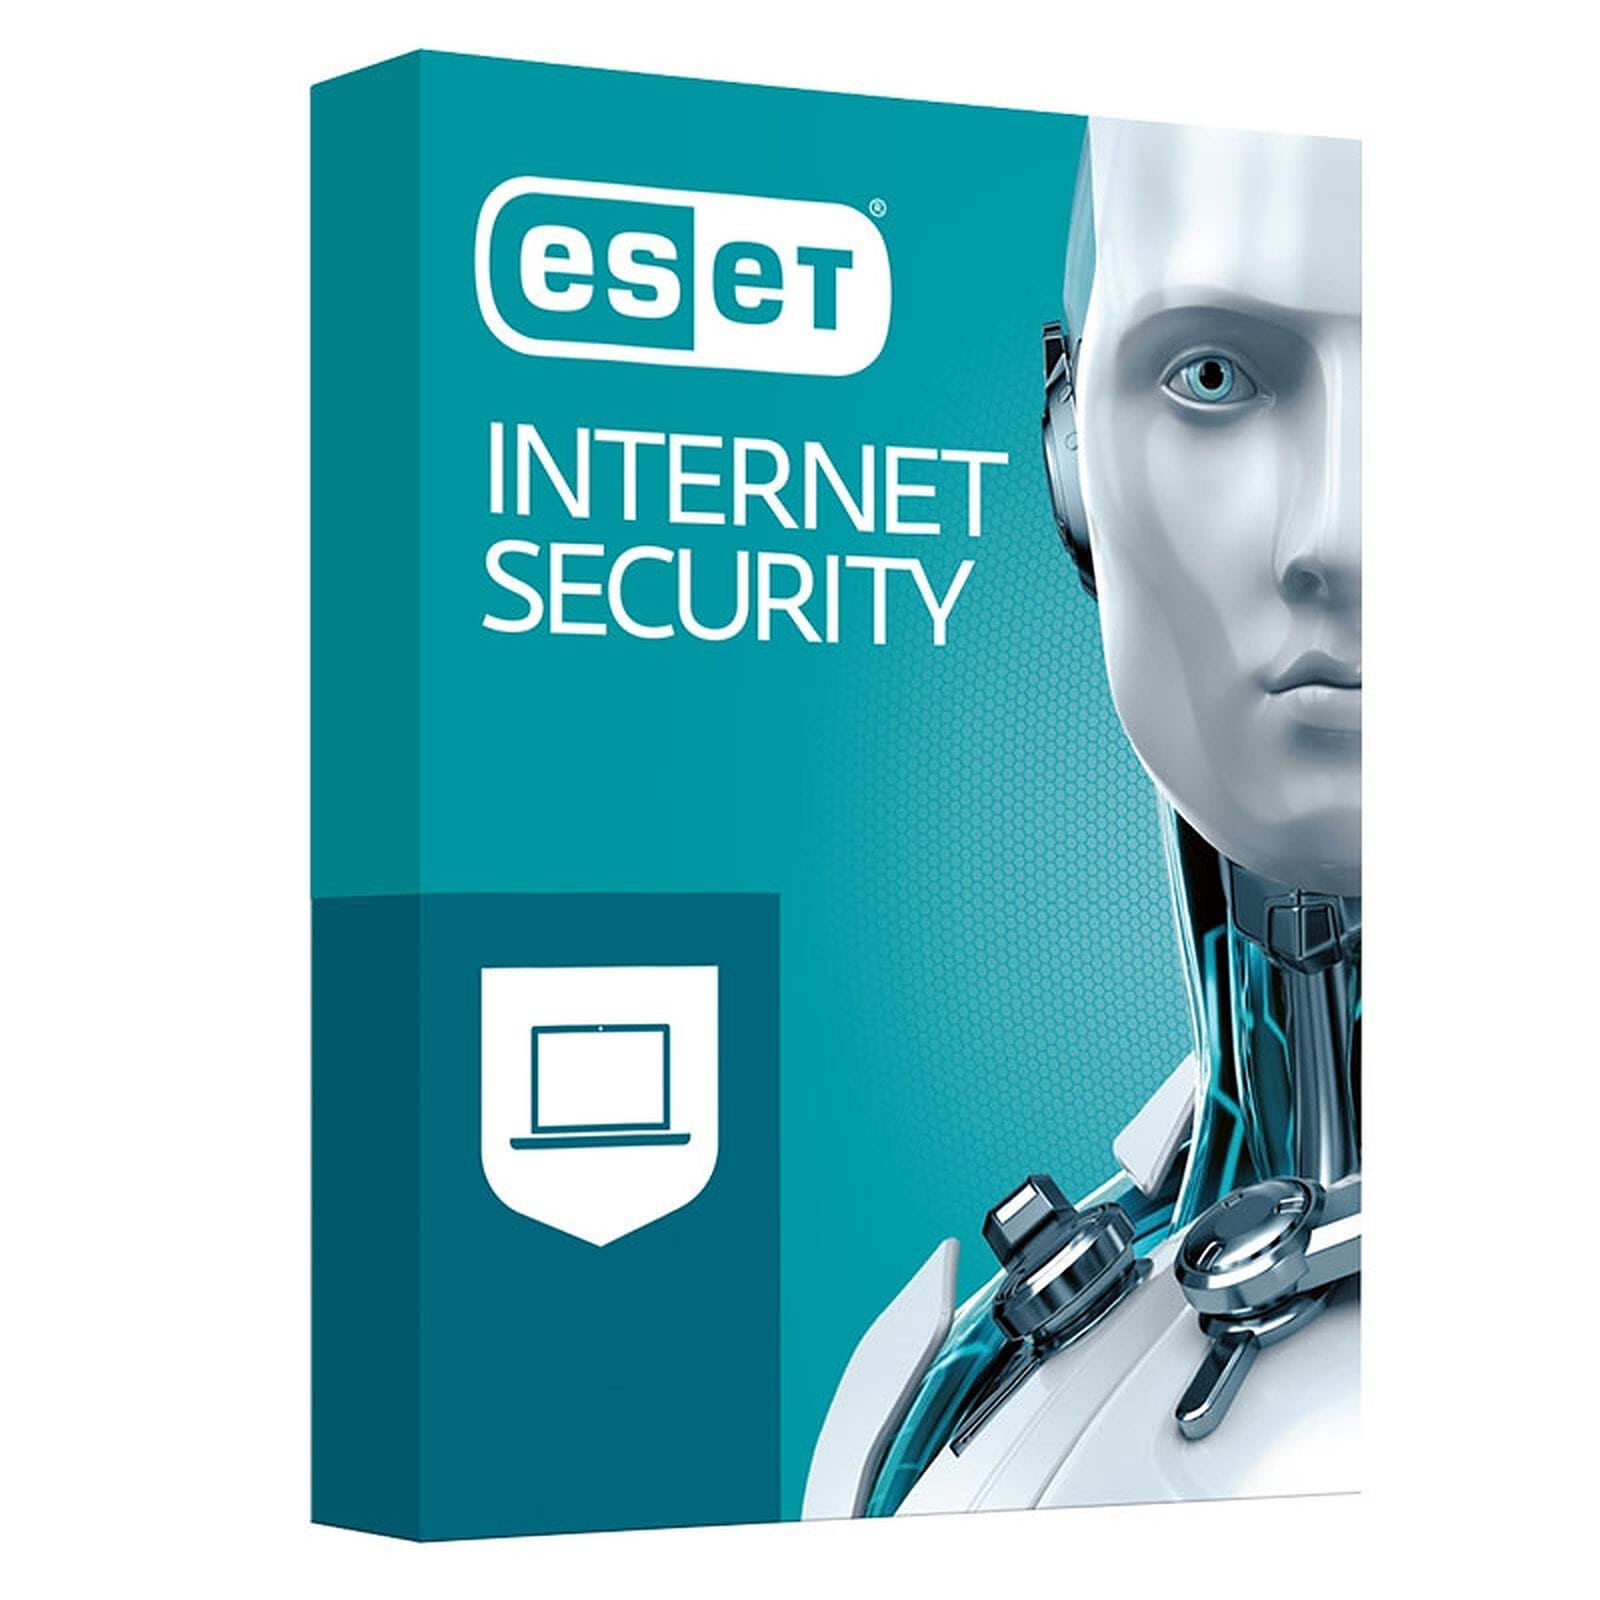 ESET Internet Security License Key 2 Years 3 Device